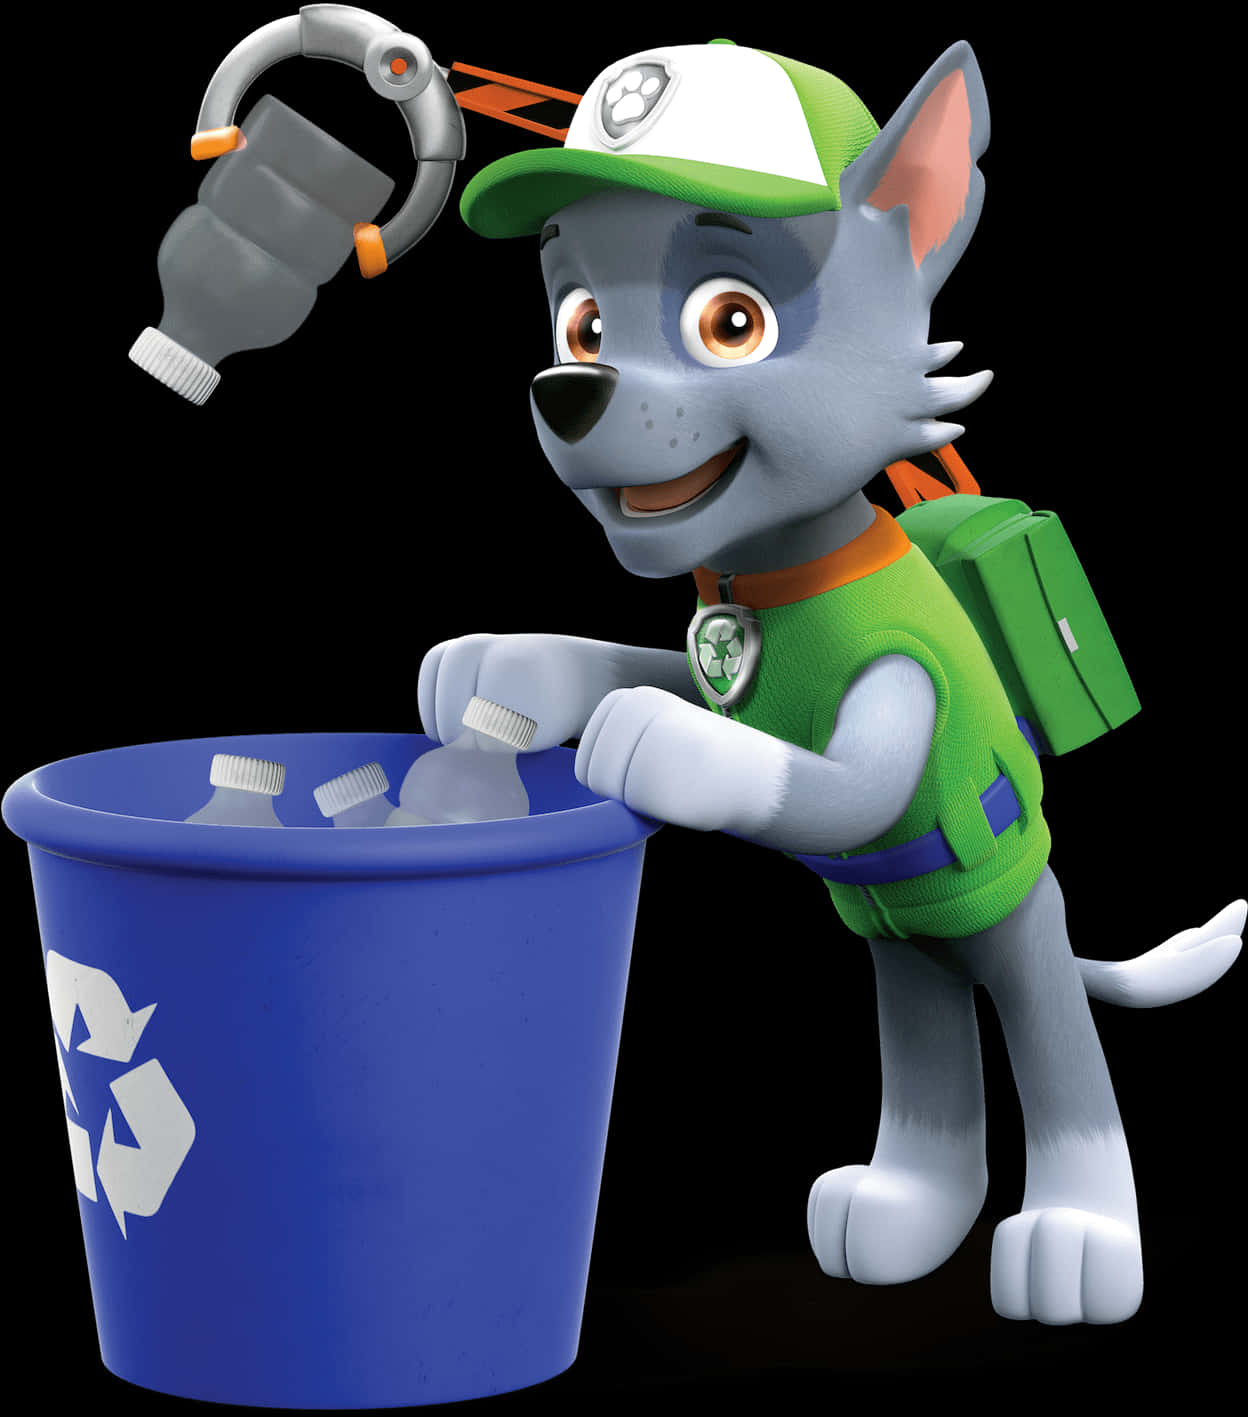 A Cartoon Dog With A Green Hat And Green Backpack Leaning On A Blue Trash Can